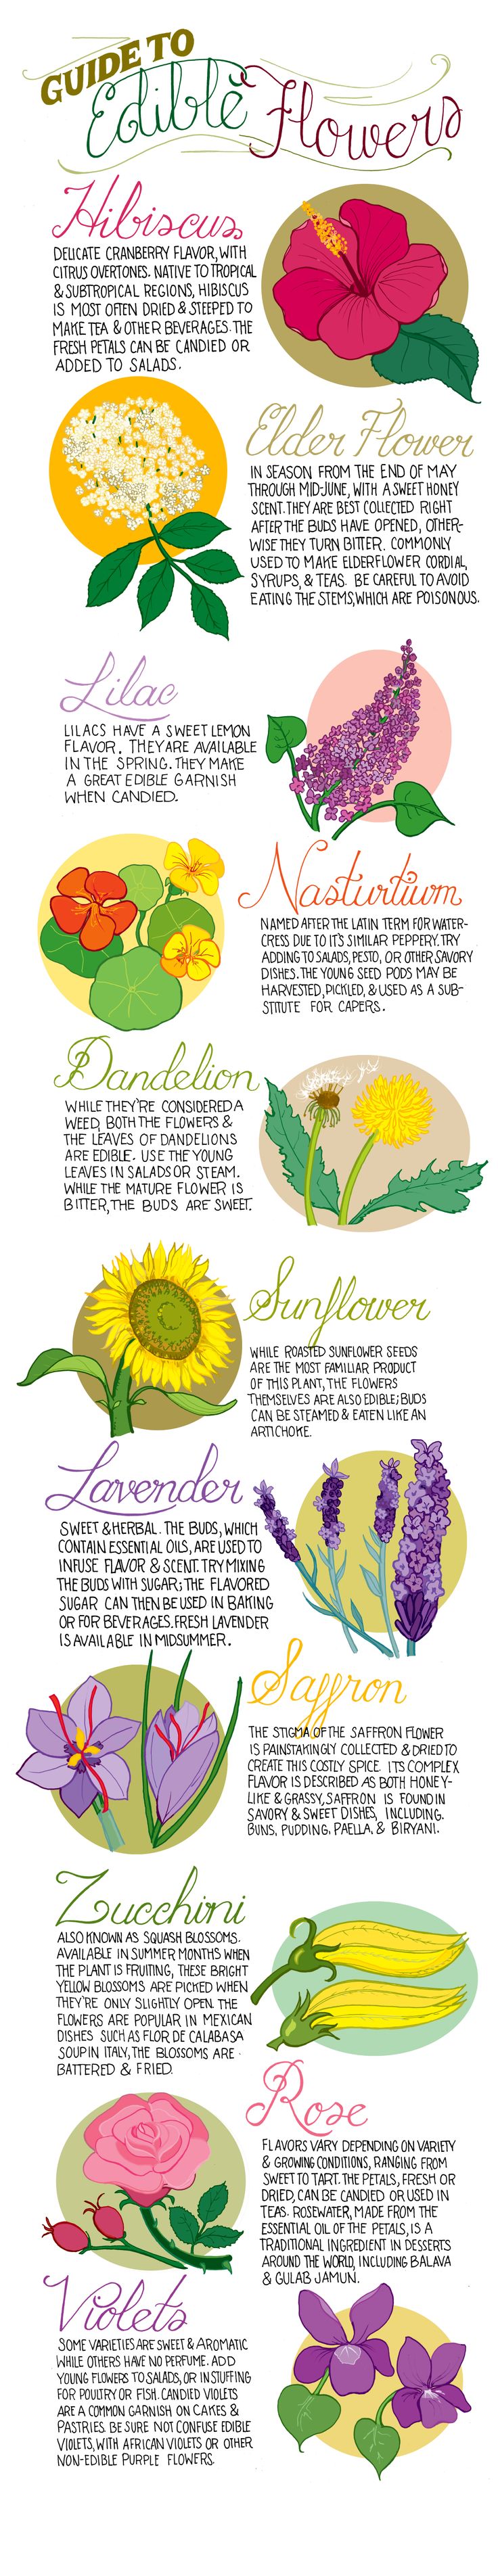 Guide to Edible Flowers